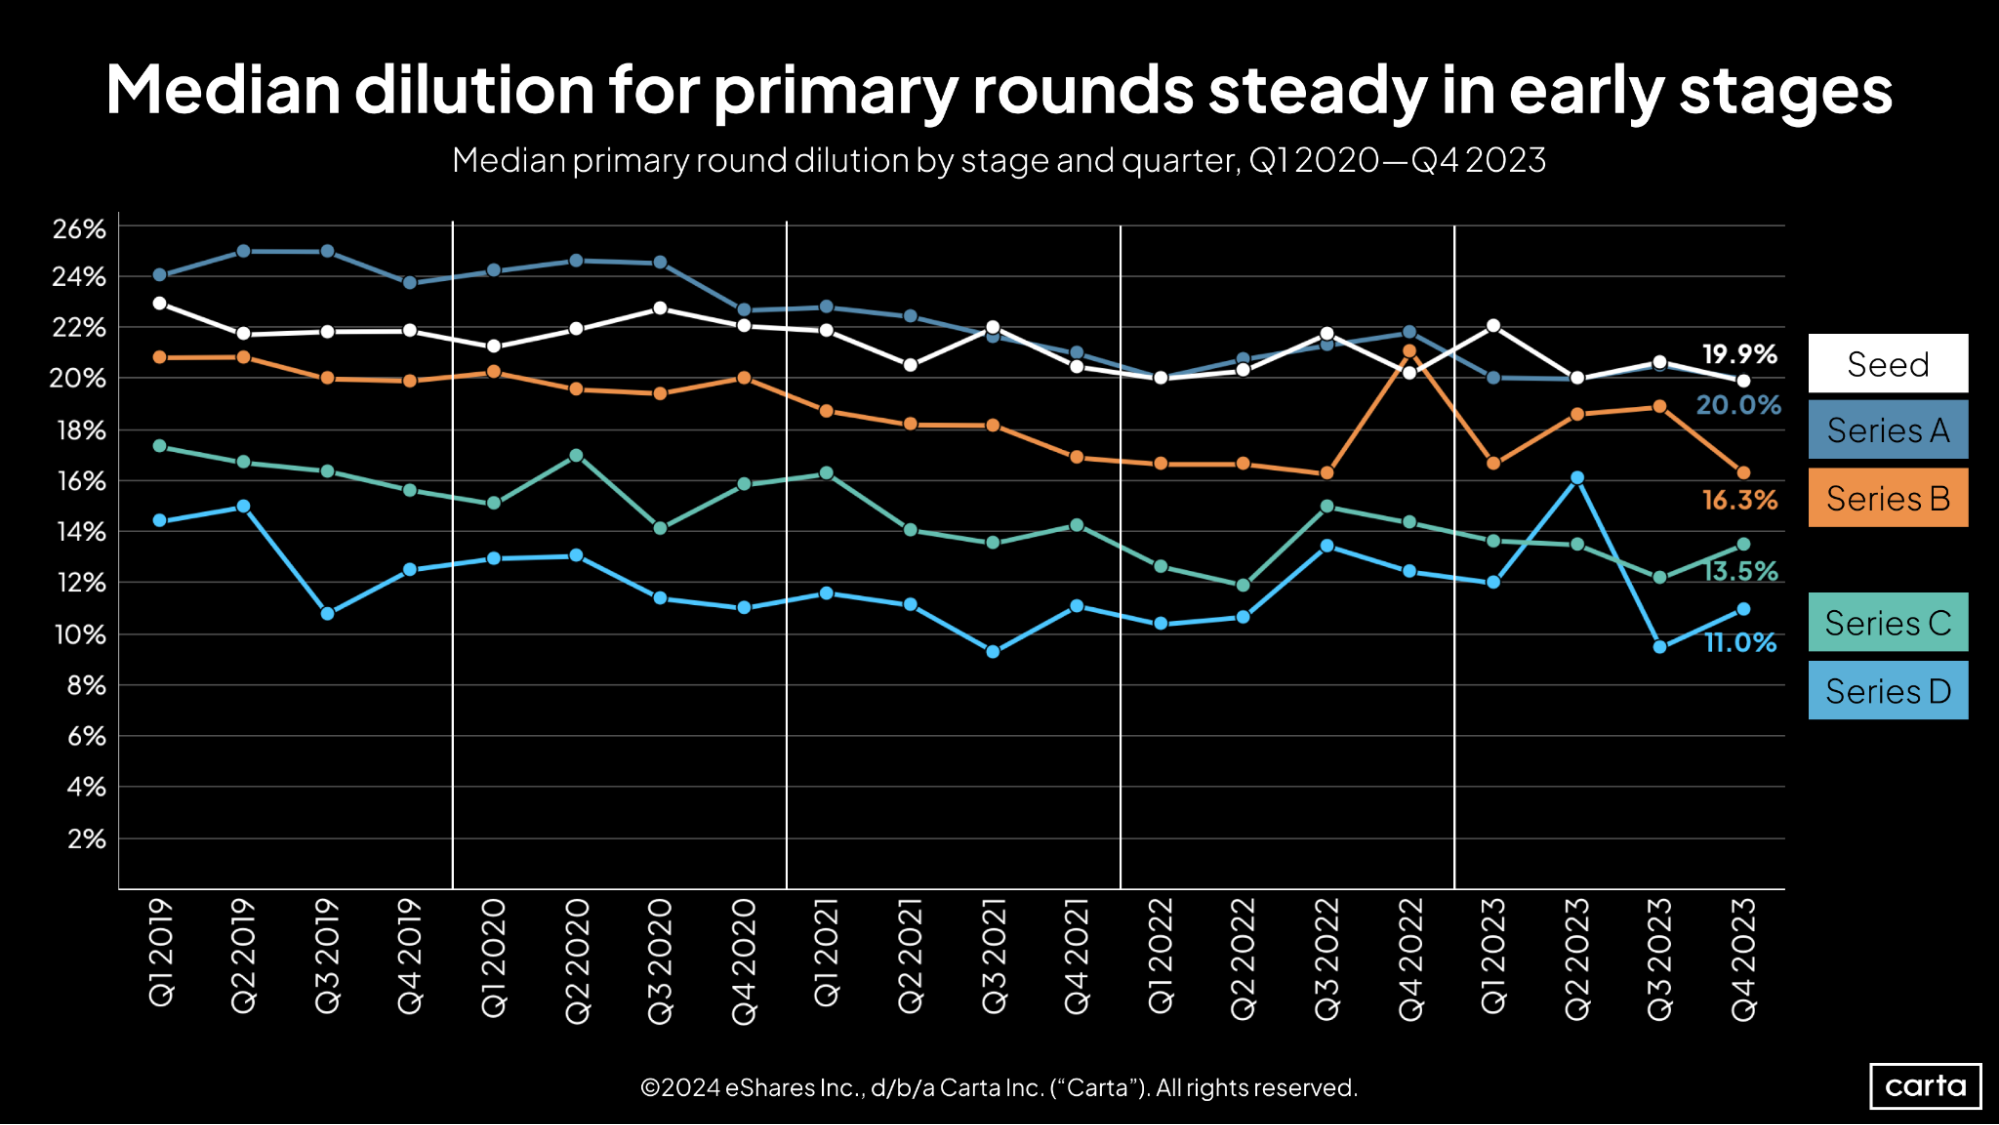 Carta SOPM Q4 2023 Median dilution for primary rounds steady in early stages